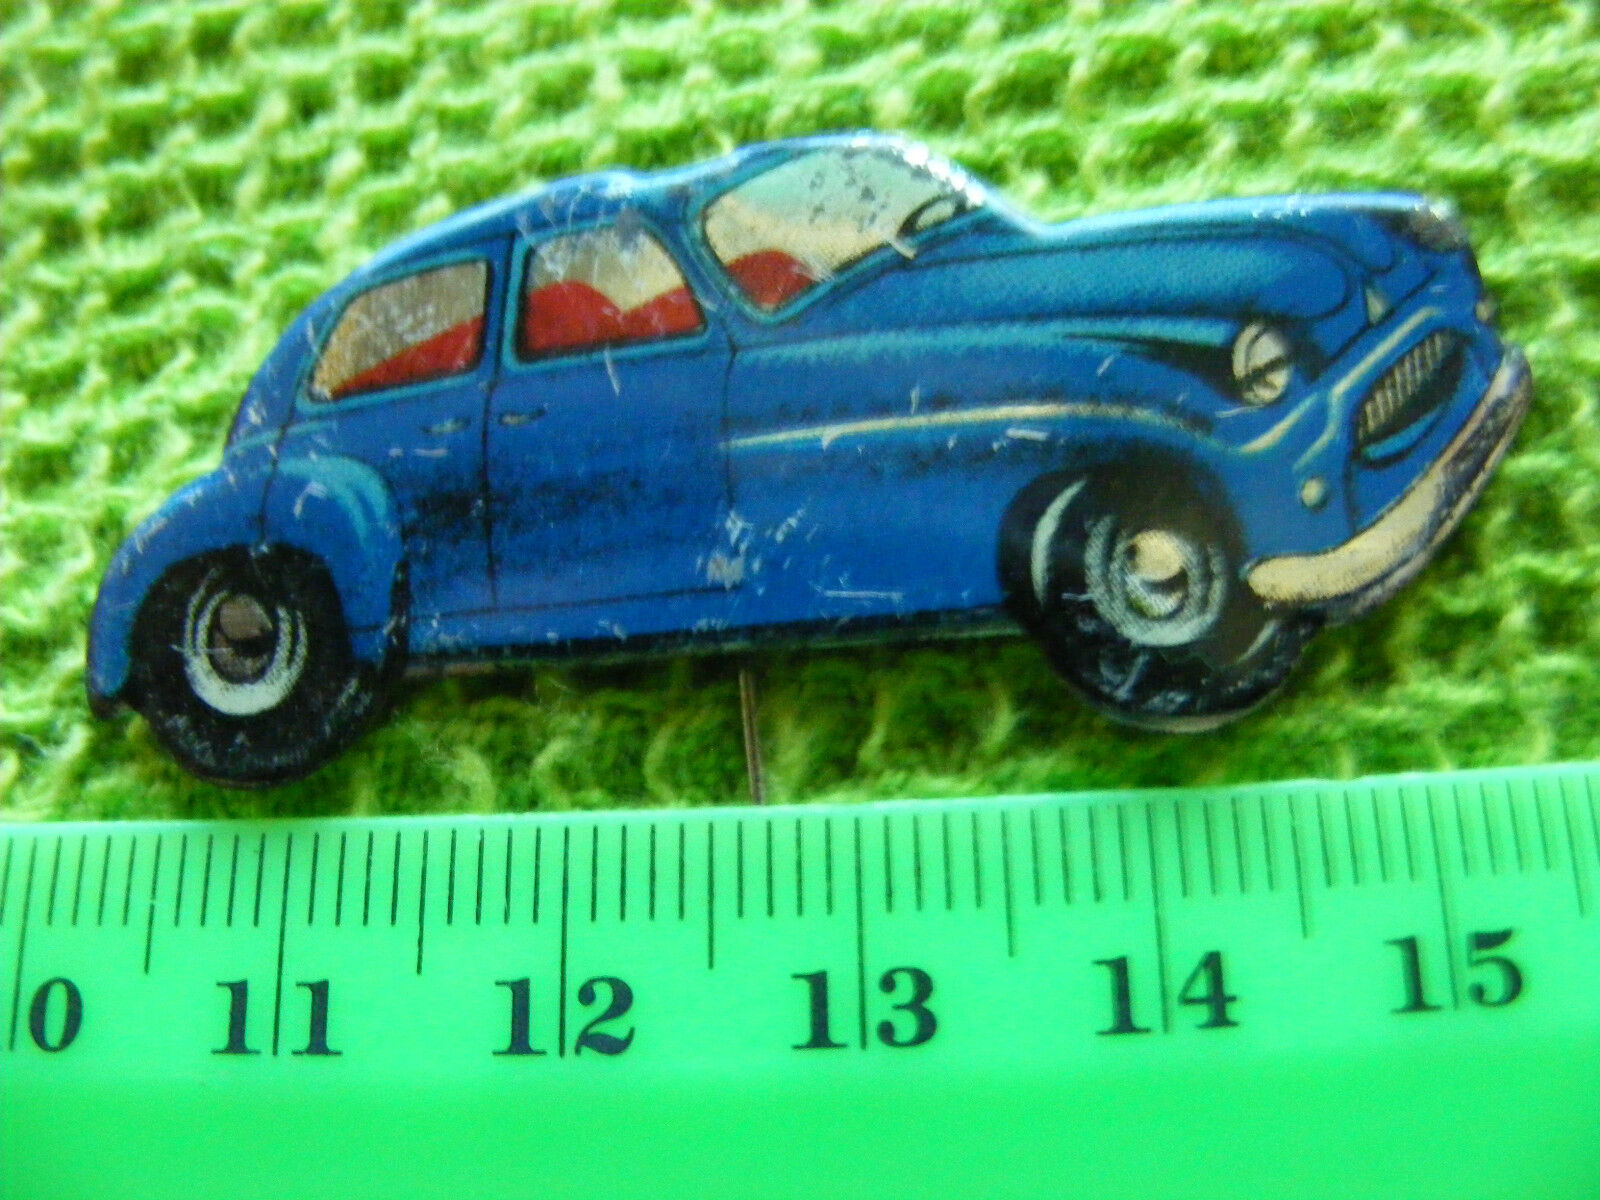  STANDARD 8 or SIMCA  8 Car.  ,Very Old car-shaped Pin Badge,.1950s (Blue).